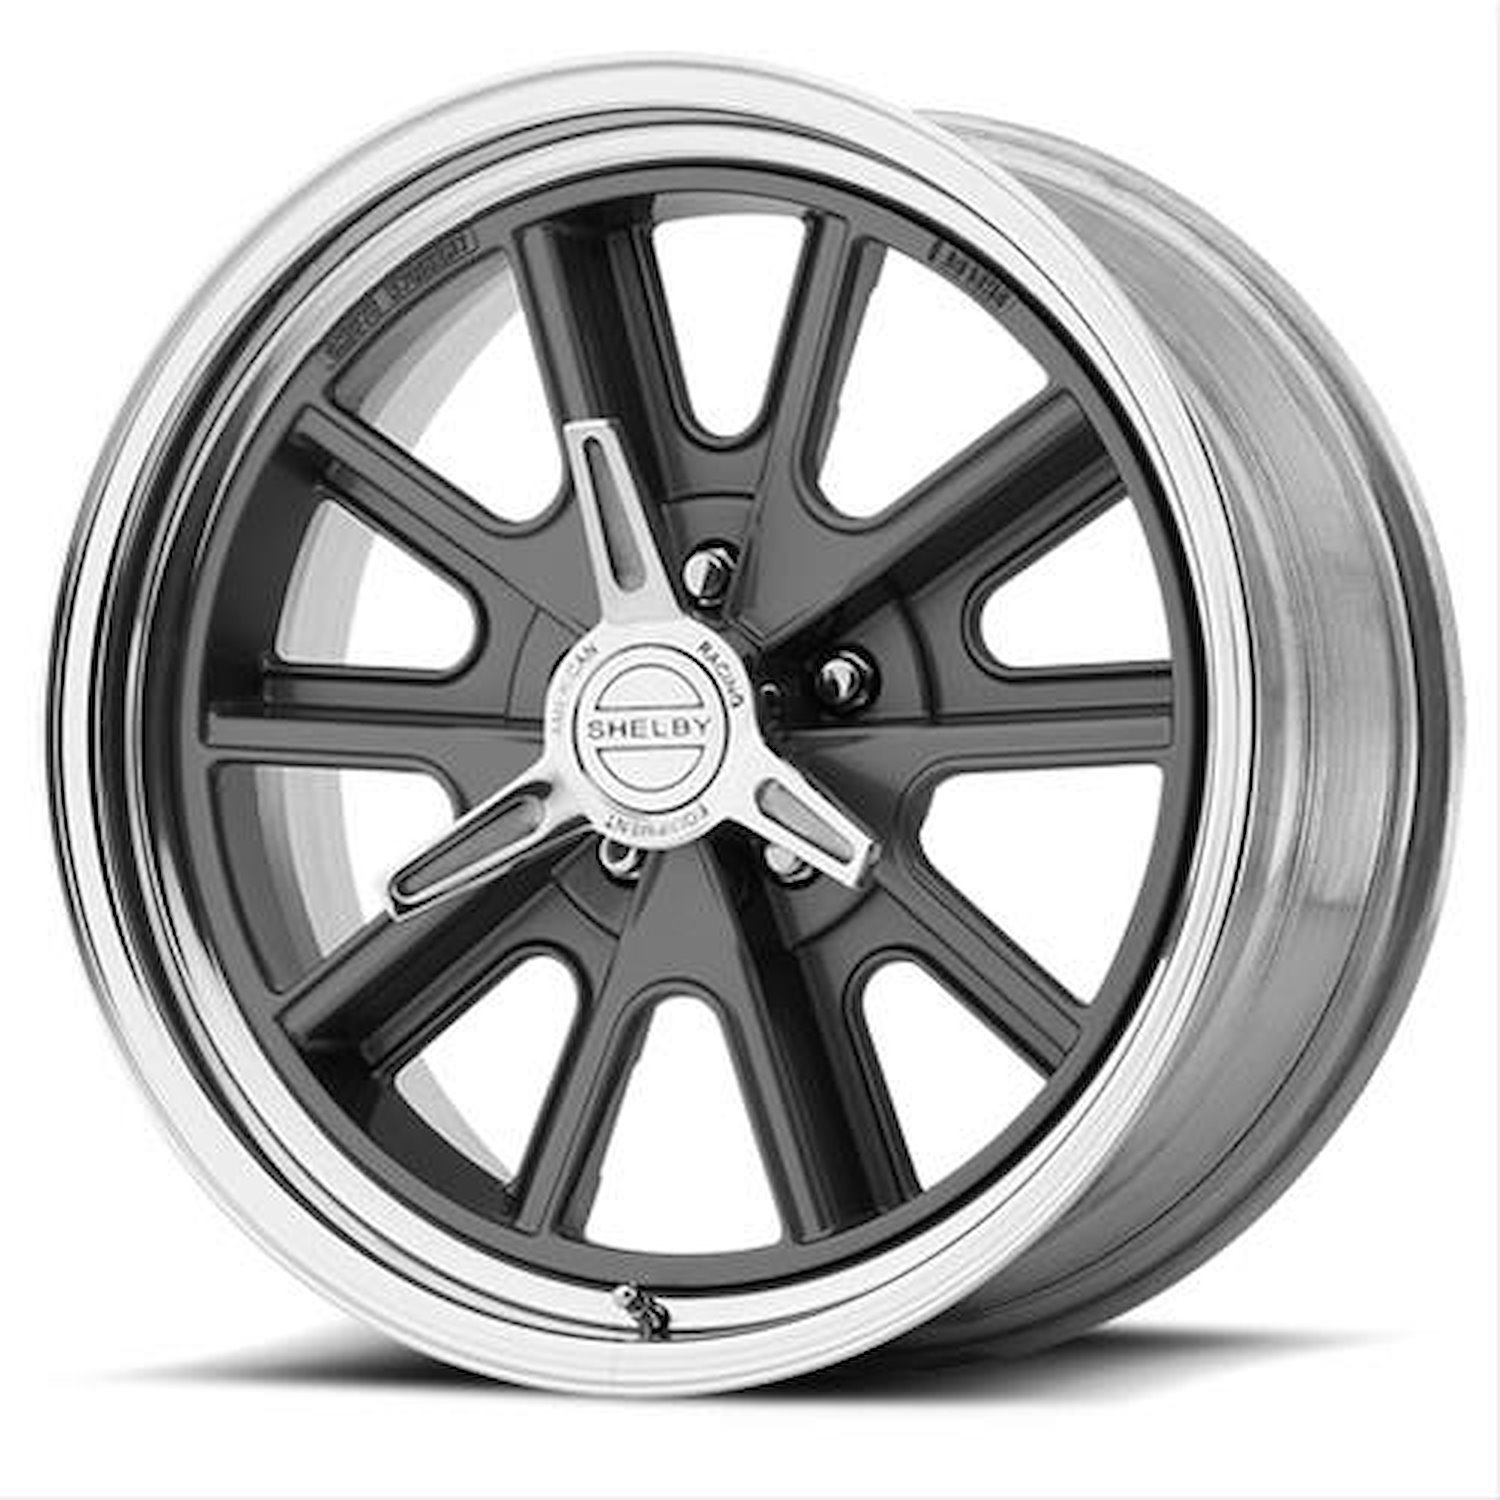 AMERICAN RACING 427 SHELBY COBRA TWO-PIECE MAG GRAY CENTER POLISHED BARREL 15 x 7 5X4.75 -19 3.25